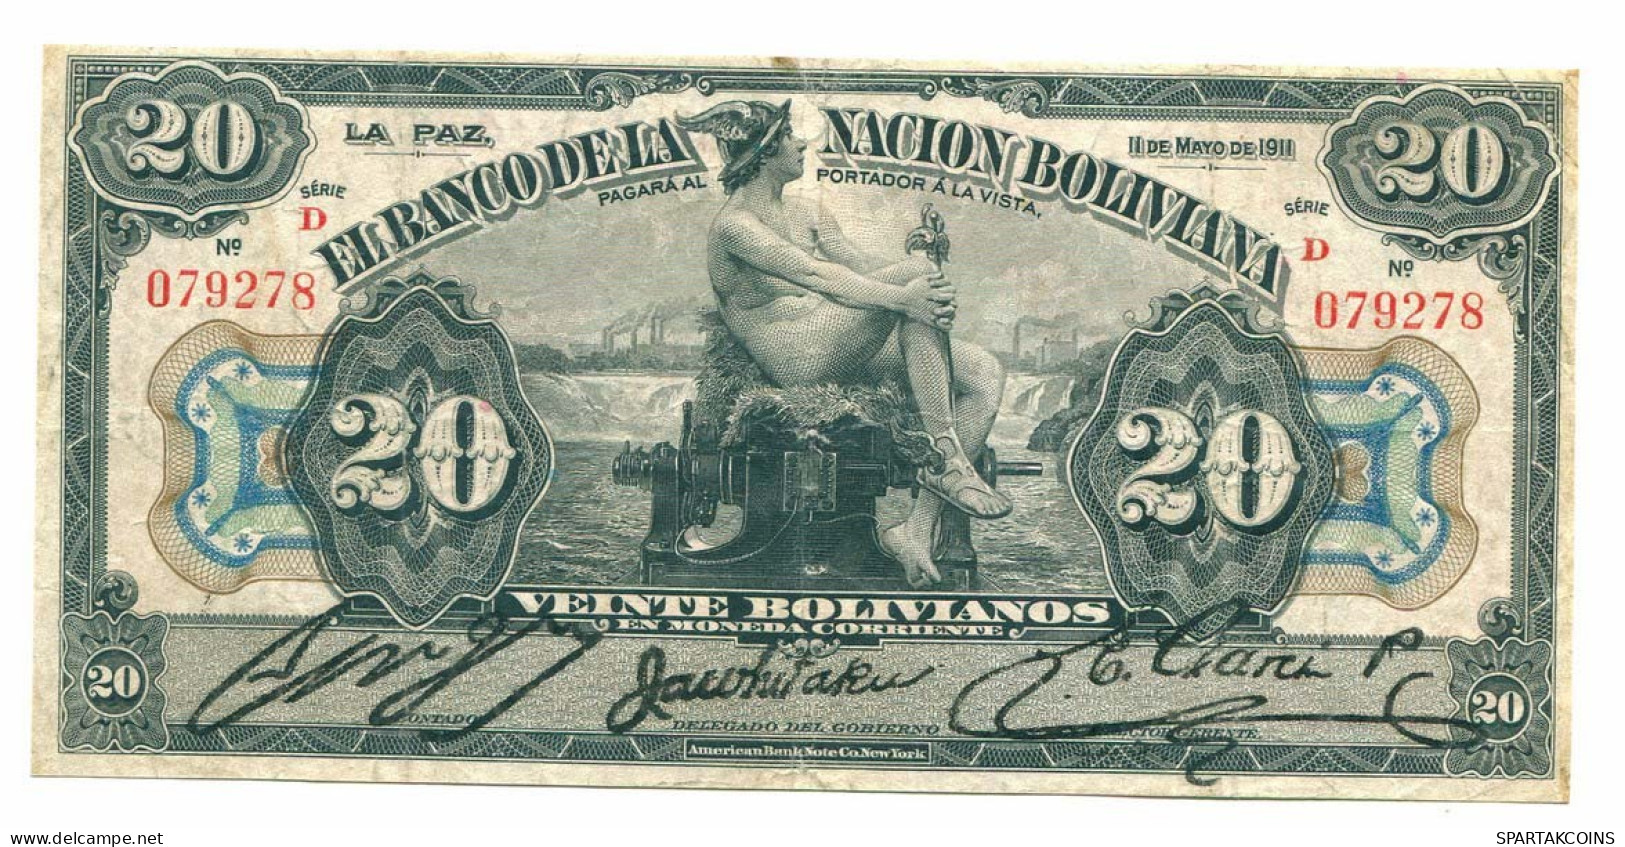 BOLIVIA 20 BOLIVIANOS 1911 SERIE D Paper Money Banknote #P10795.4 - [11] Local Banknote Issues